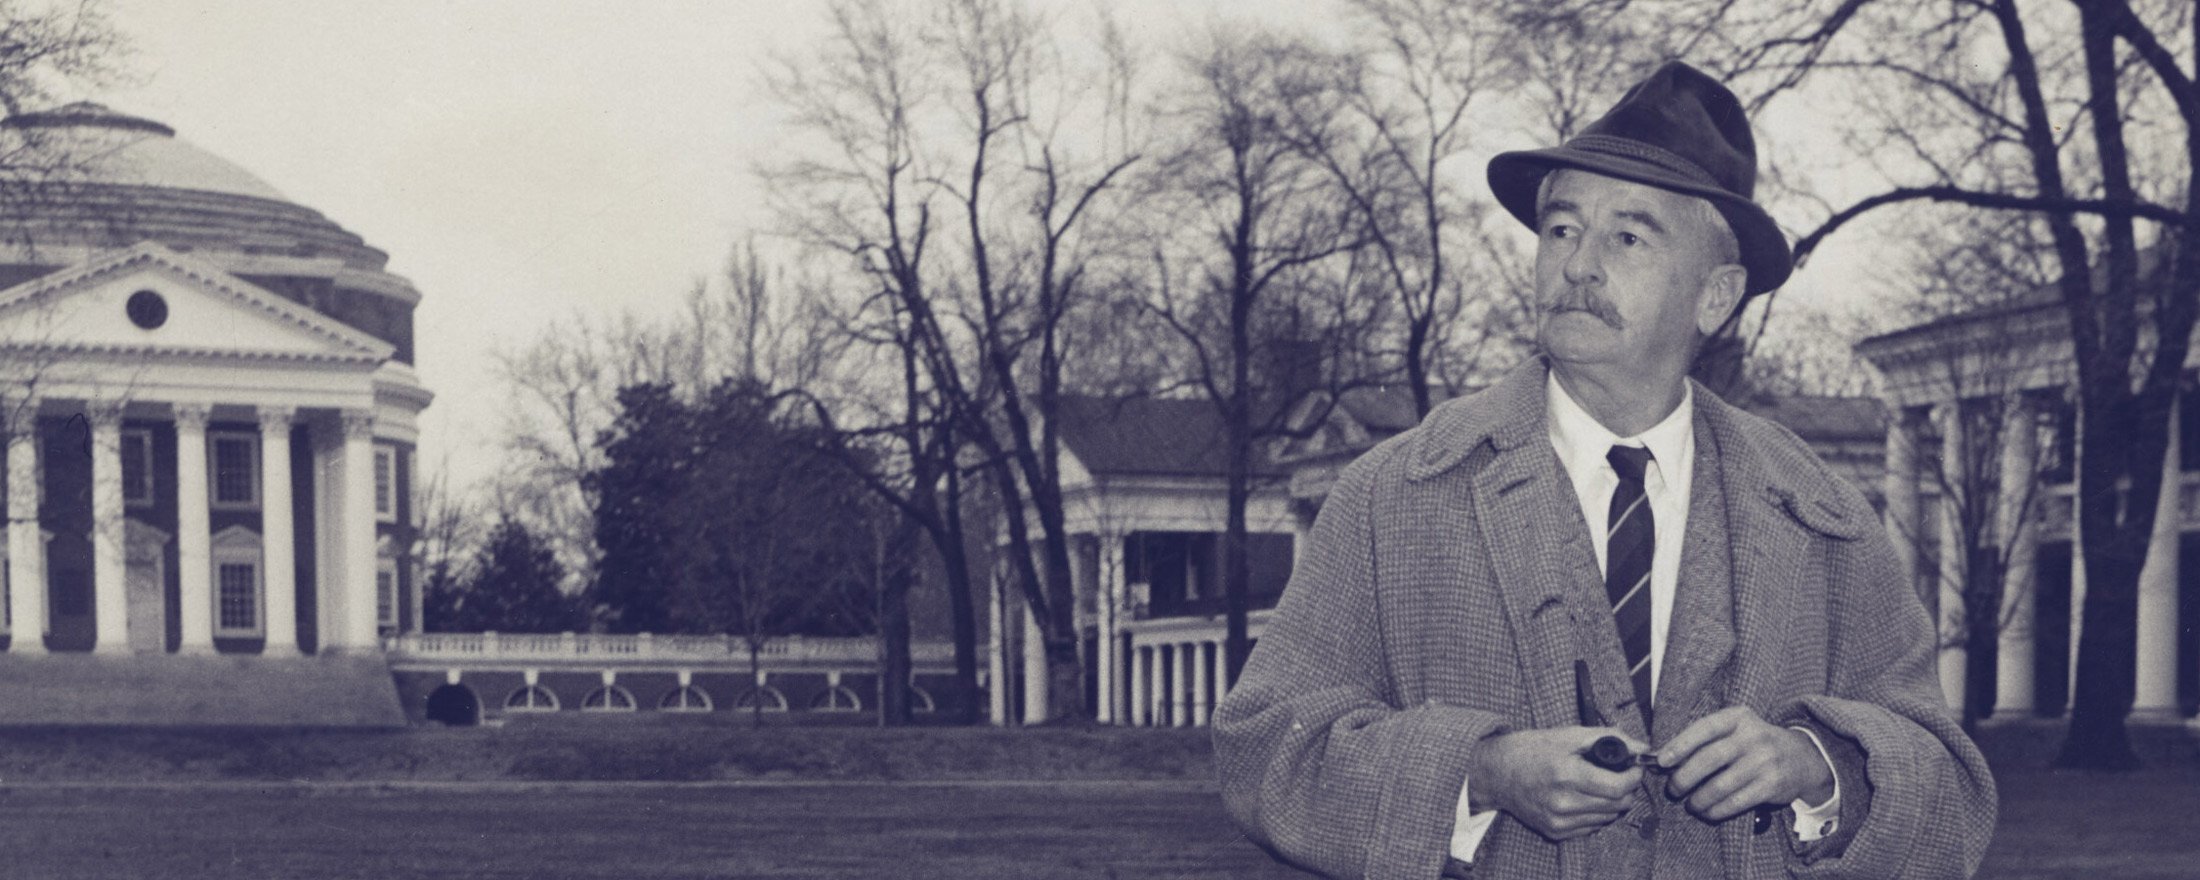 Faulkner standing on the lawn with a pipe. black and white image